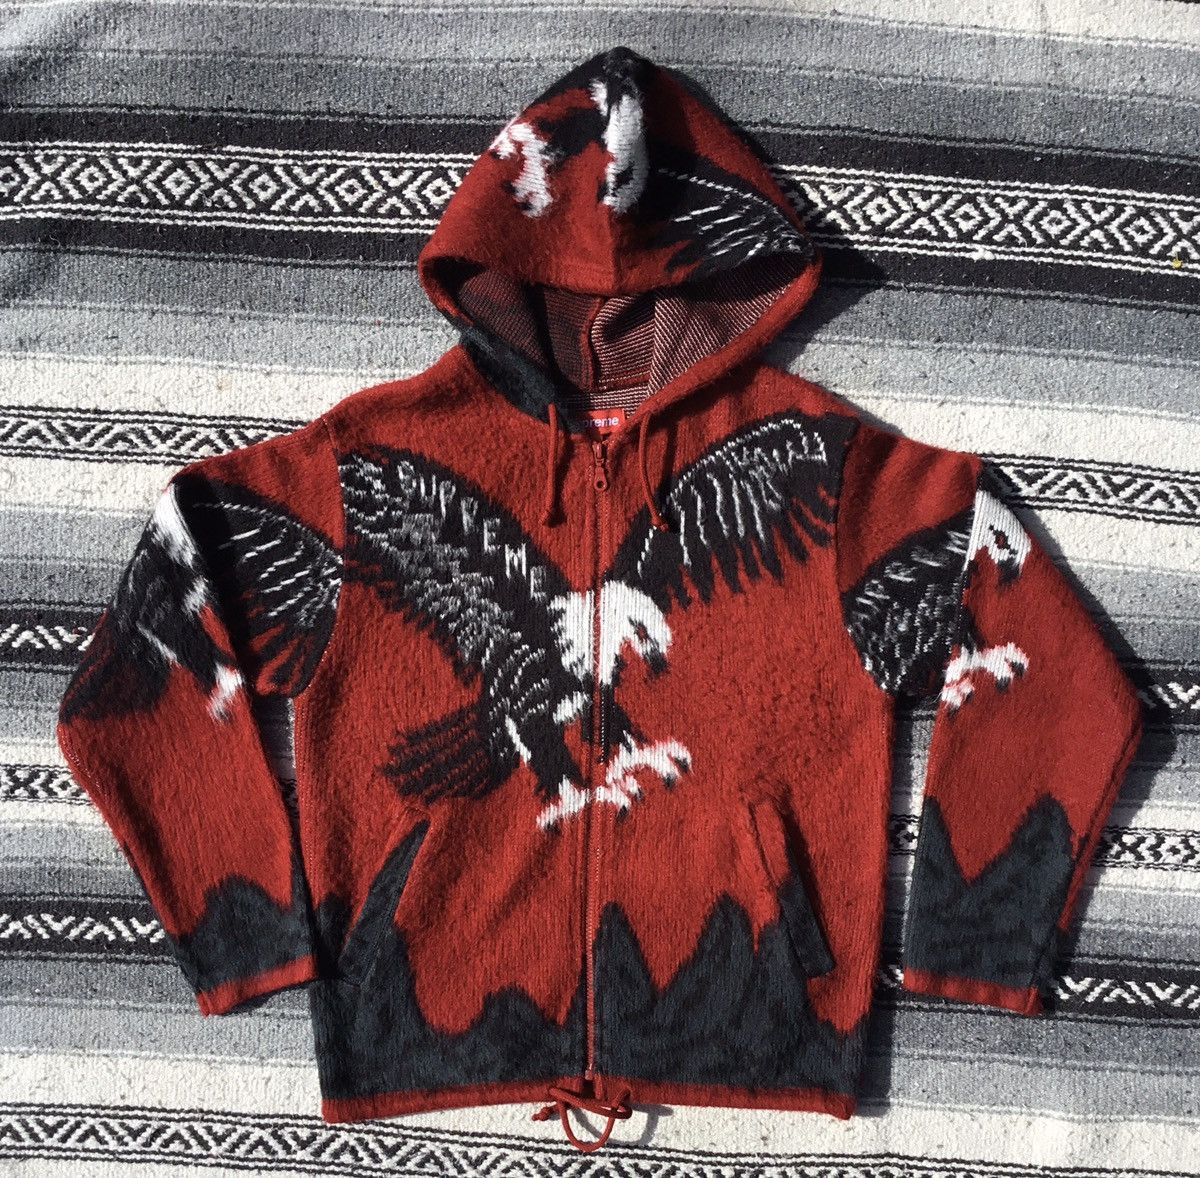 Supreme SS16 Supreme Eagle hooded zip up sweater Size US S / EU 44-46 / 1 - 1 Preview